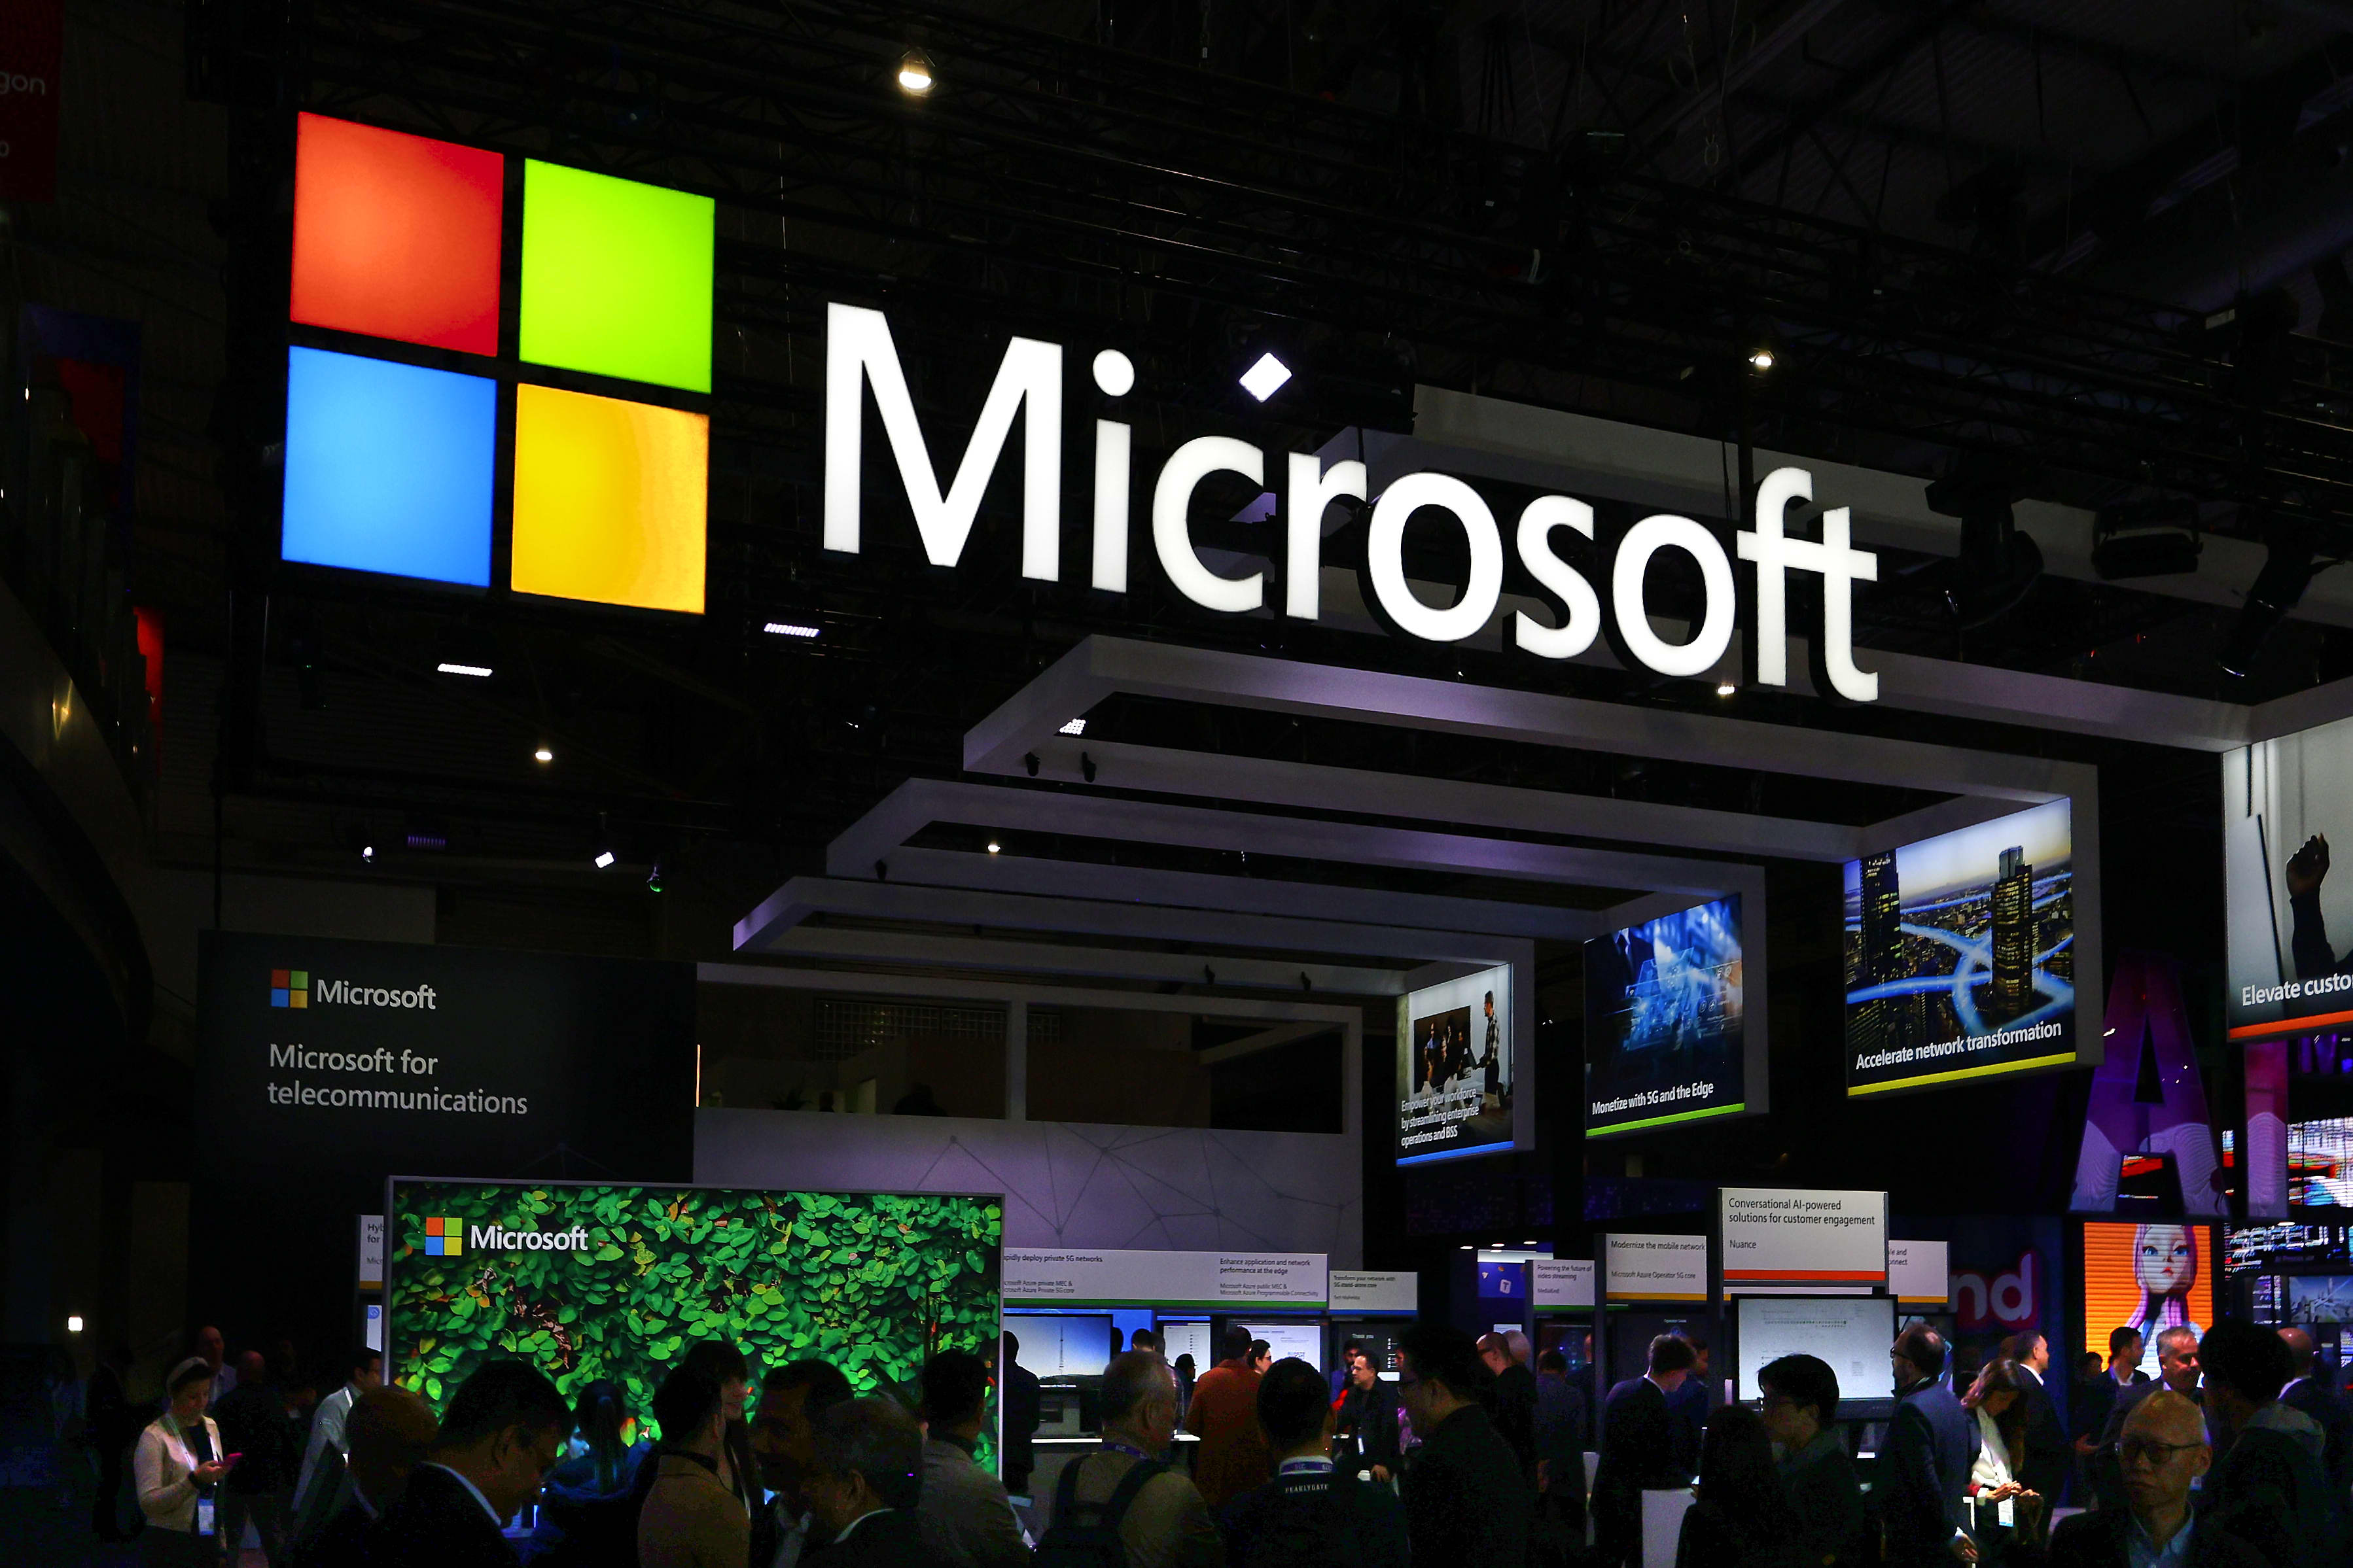 This week's best performers include two chip stocks along with Microsoft 